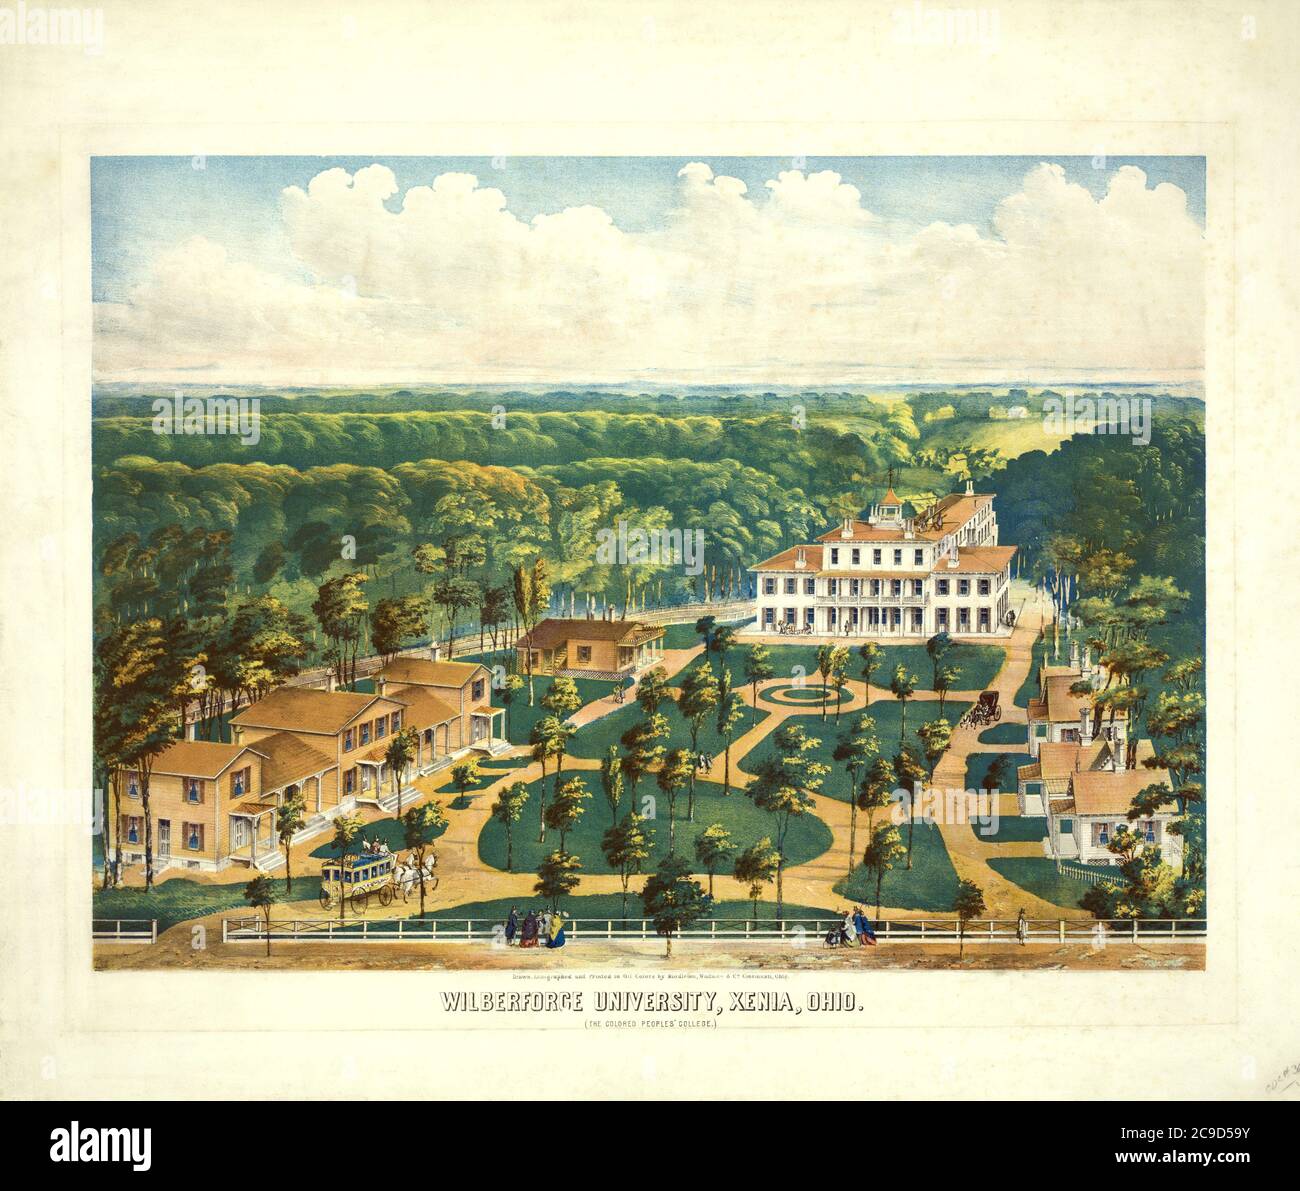 Wilberforce University, Xenia, Ohio (The Colored Peoples' College), drawn, lithographed and Printed in Oil Colors by Middleton Wallace & Co., 1850's Stock Photo